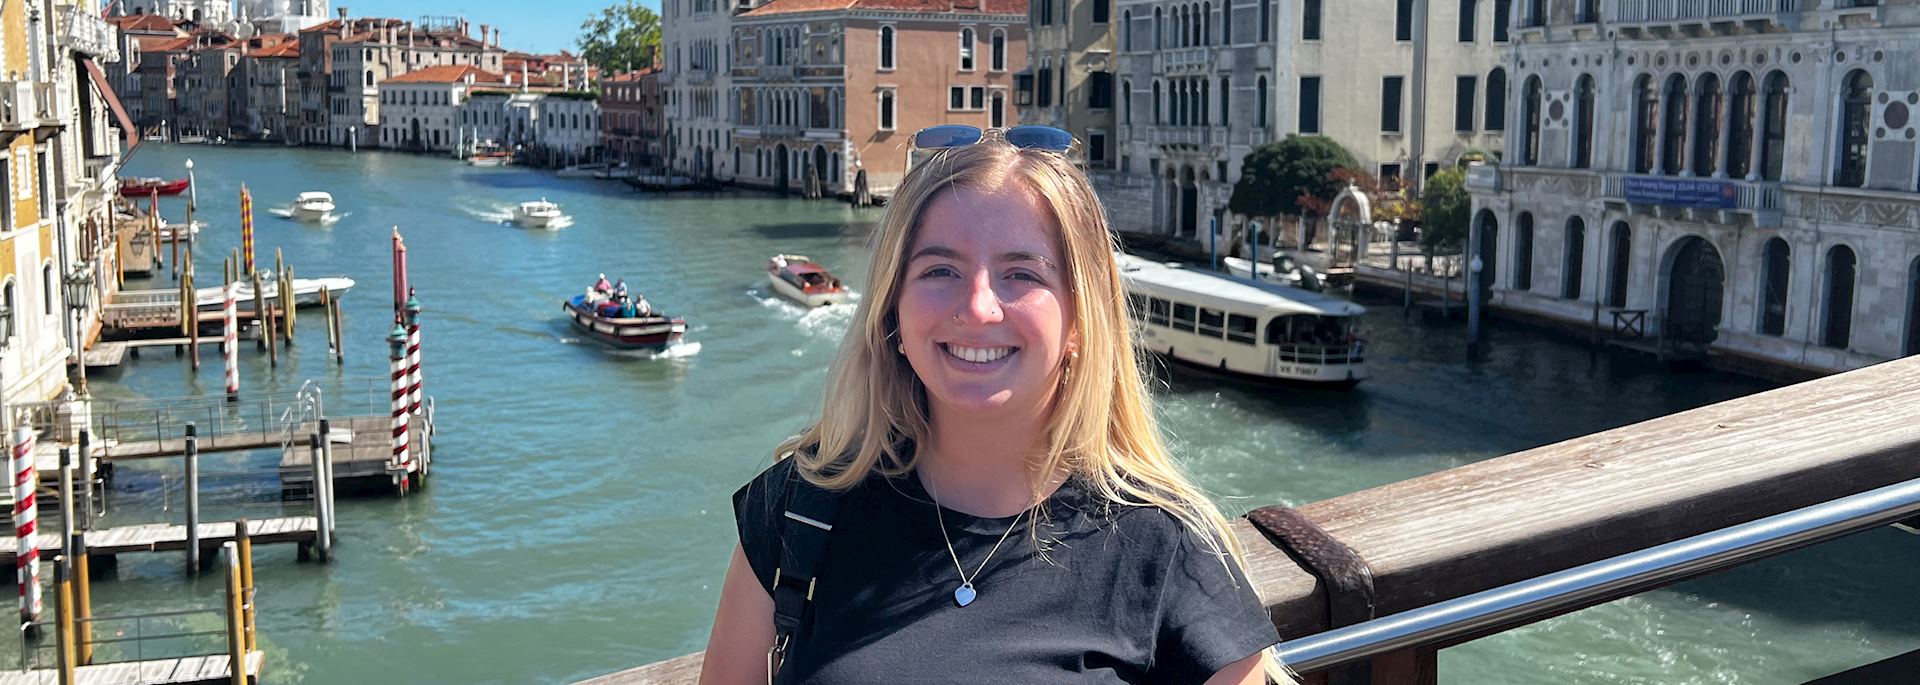 Shannon on the Grand Canal, Venice, Italy